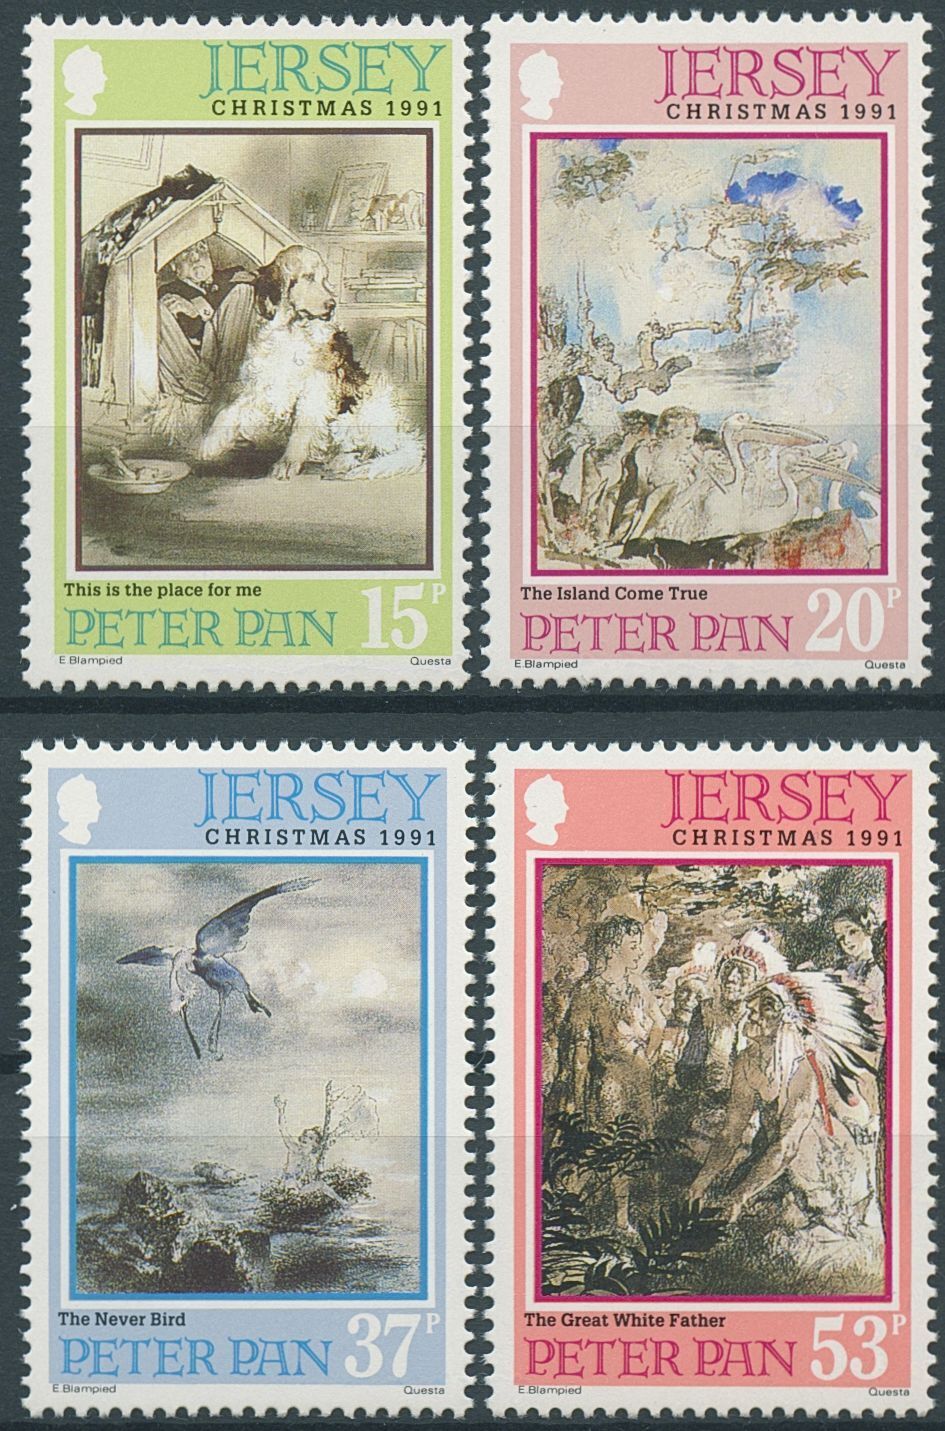 Jersey 1991 MNH Christmas Stamps JM Barrie Peter Pan Writers Literature 4v Set